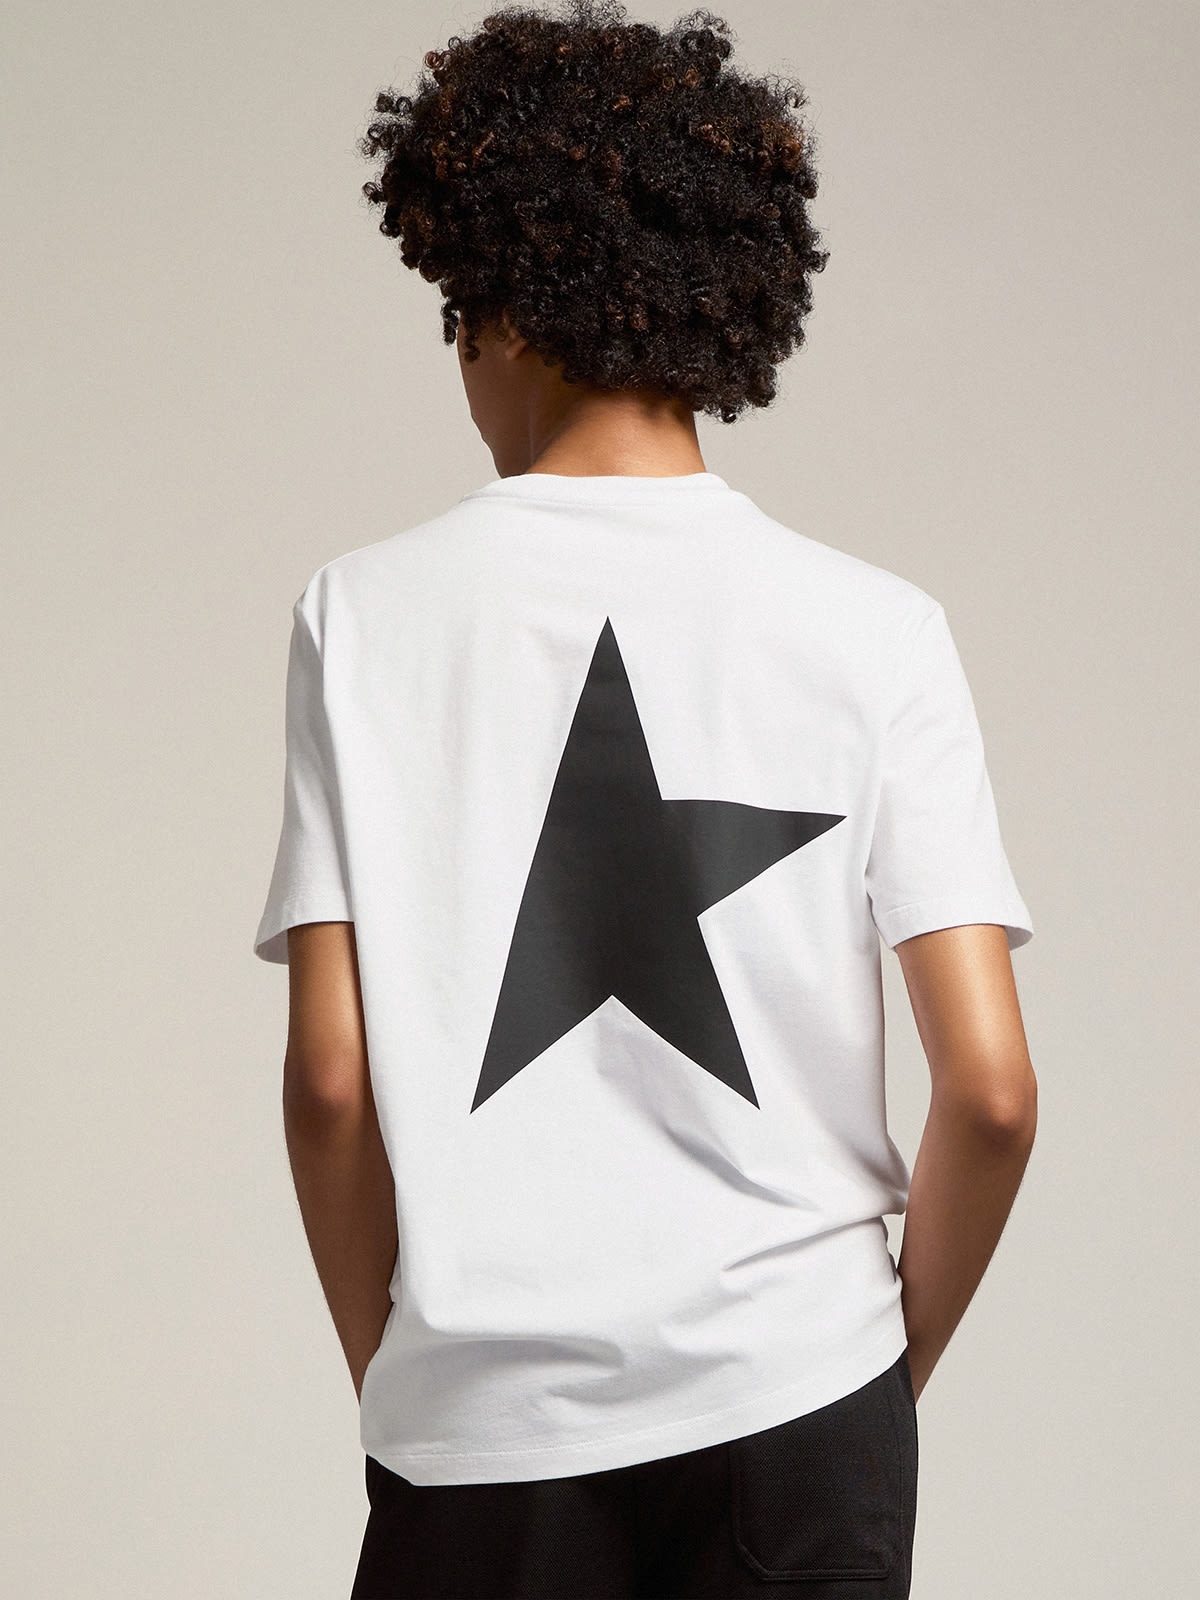 Women's white T-shirt with contrasting black logo and star - 5